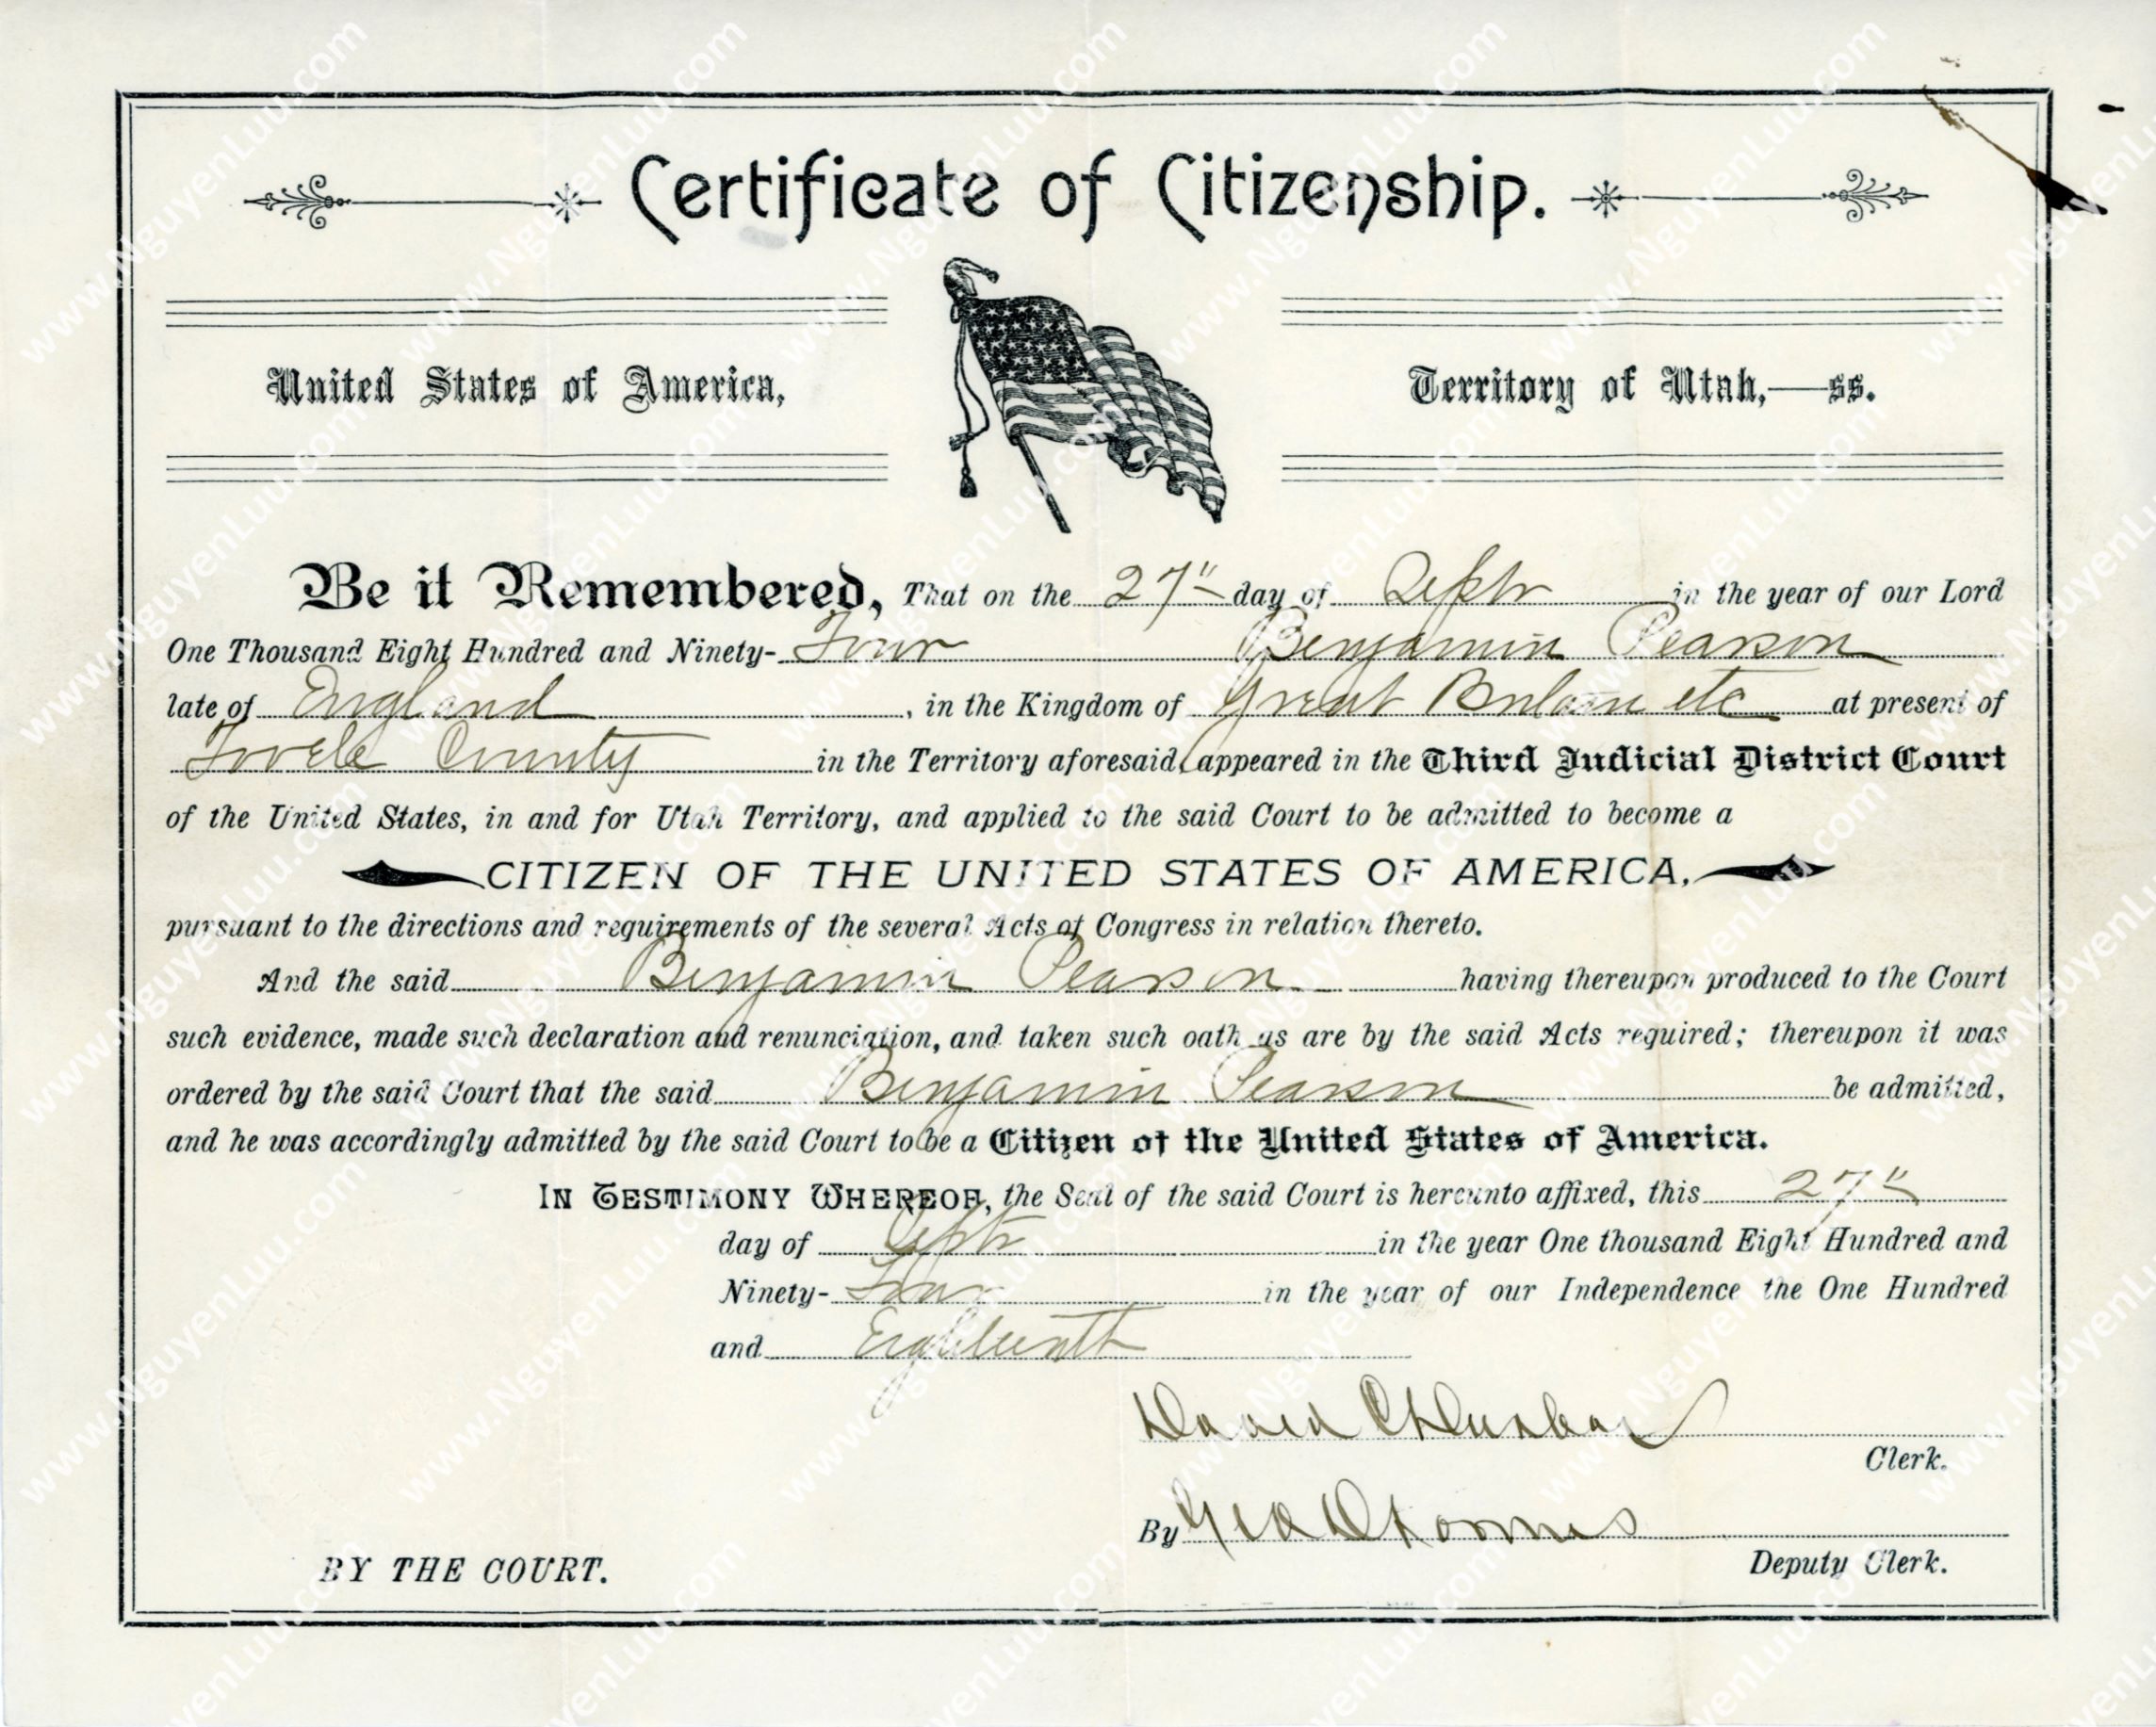 U.S. Certificate of Citizenship issued in the State of Utah in 1894